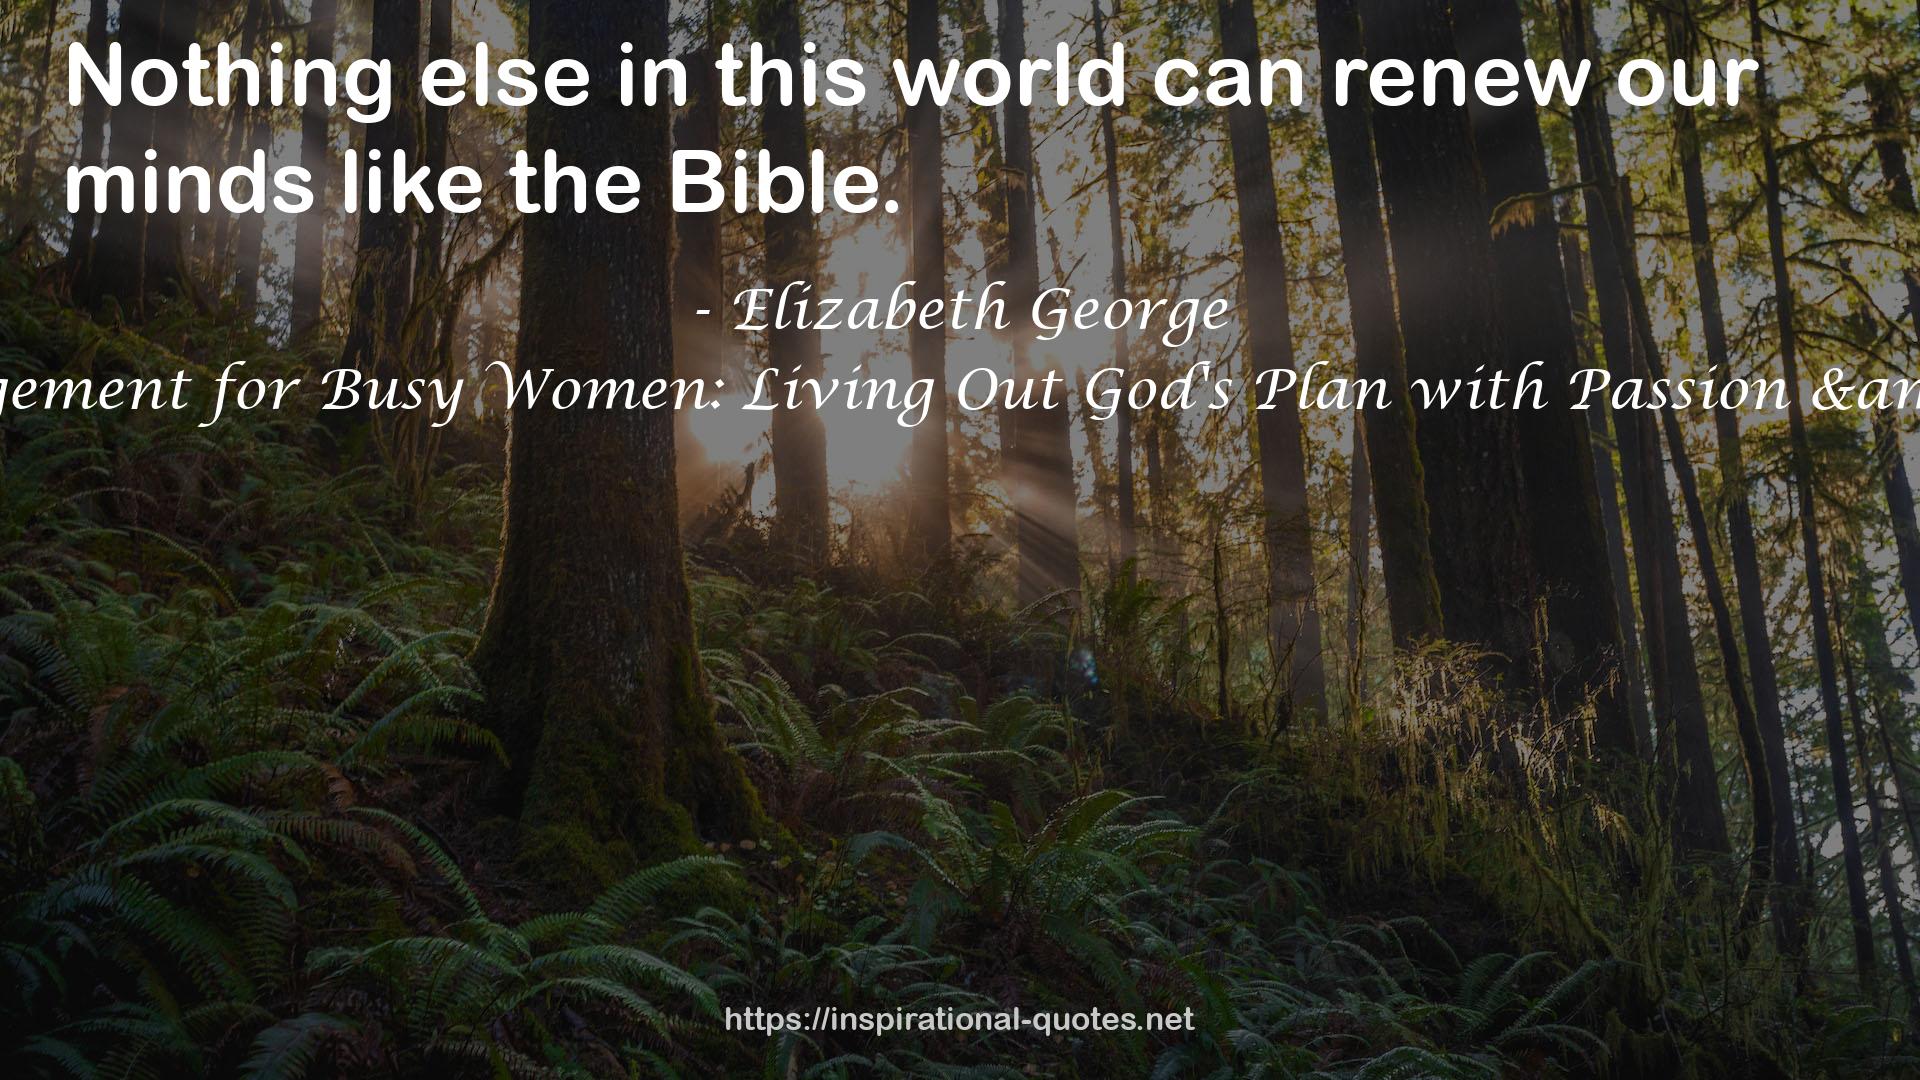 Life Management for Busy Women: Living Out God's Plan with Passion & Purpose QUOTES